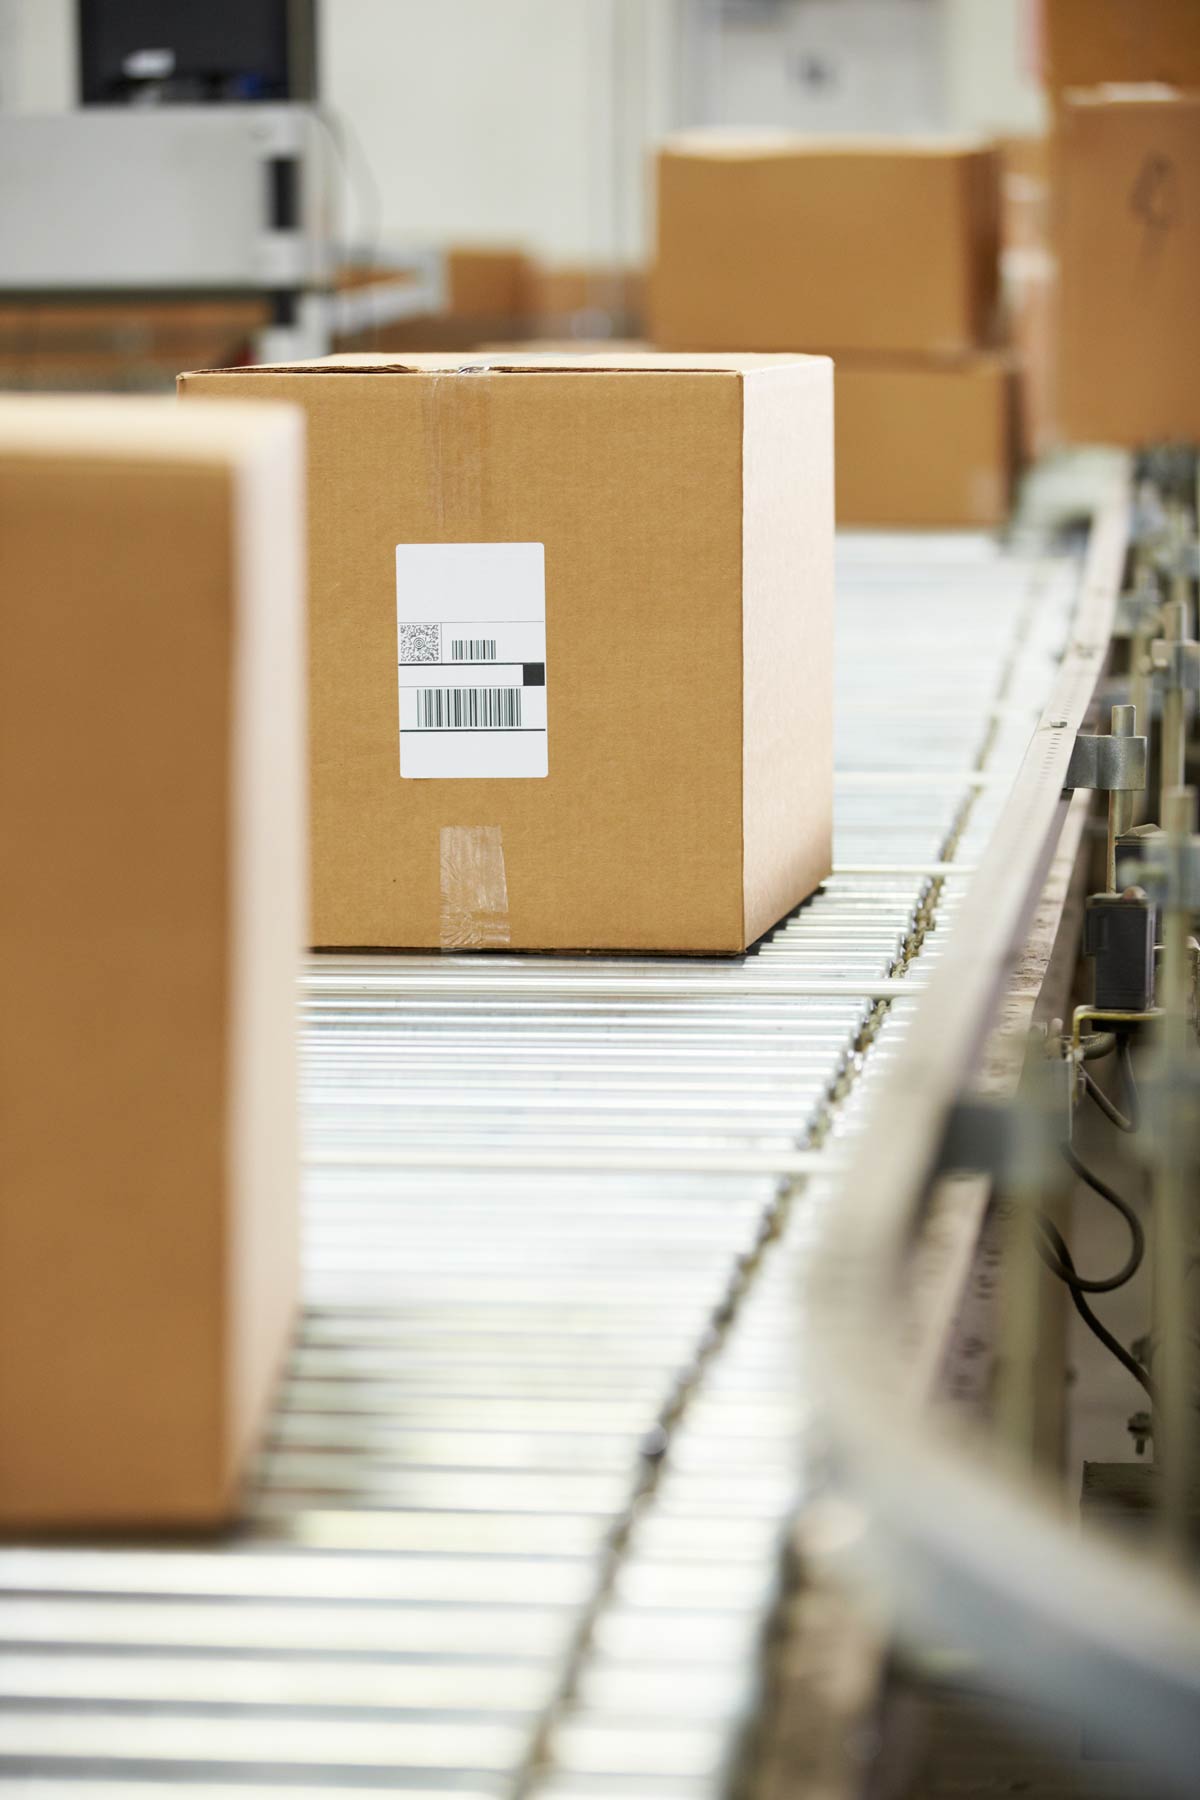 Shipping boxed orders down a conveyor belt to be delivered to consumers.